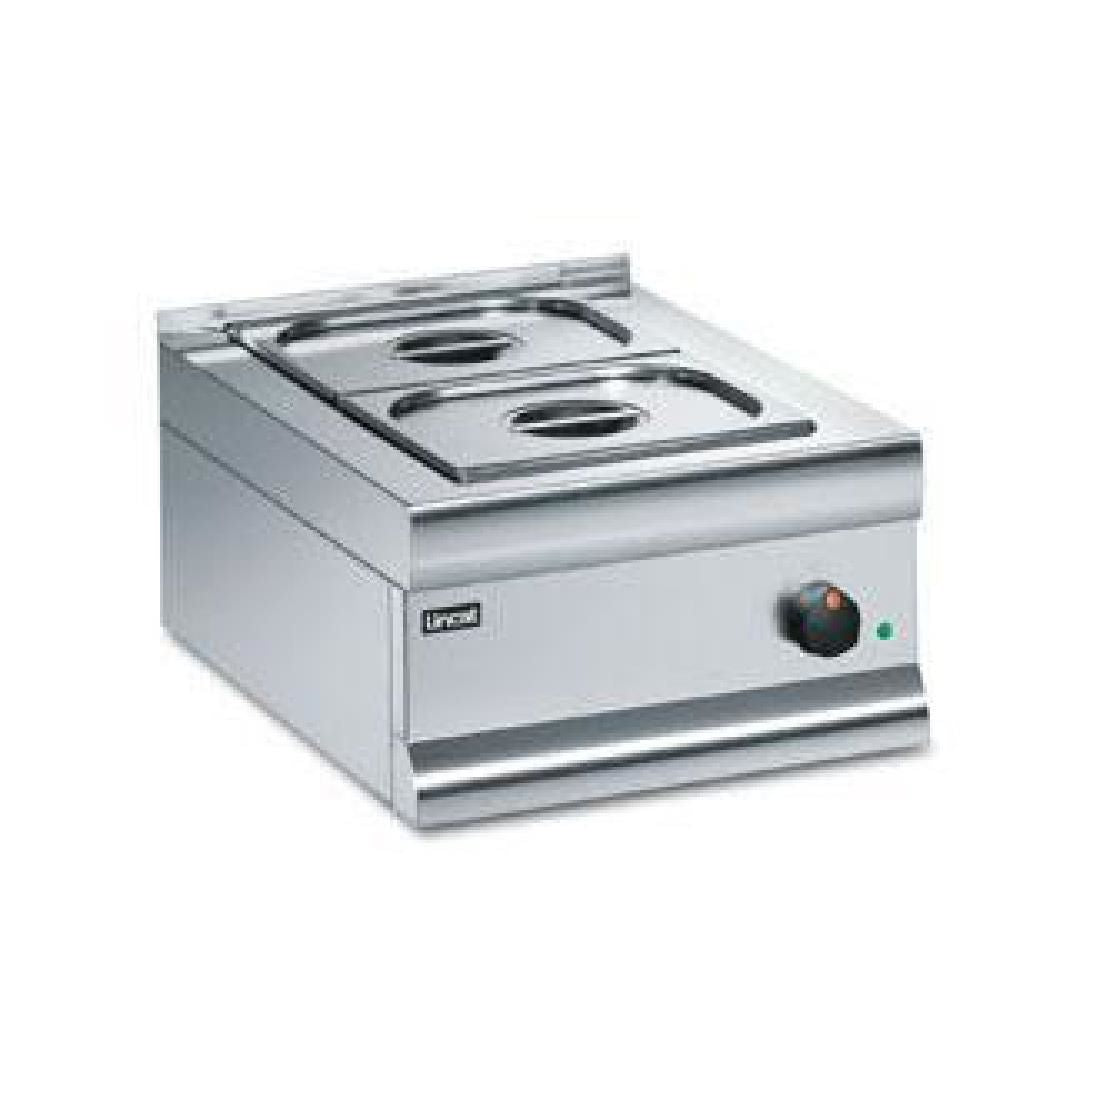 BM4 - Lincat Silverlink 600 Electric Counter-top Bain Marie - Dry Heat - Gastronorms - Base only - W 450 mm - 0.75 kW JD Catering Equipment Solutions Ltd